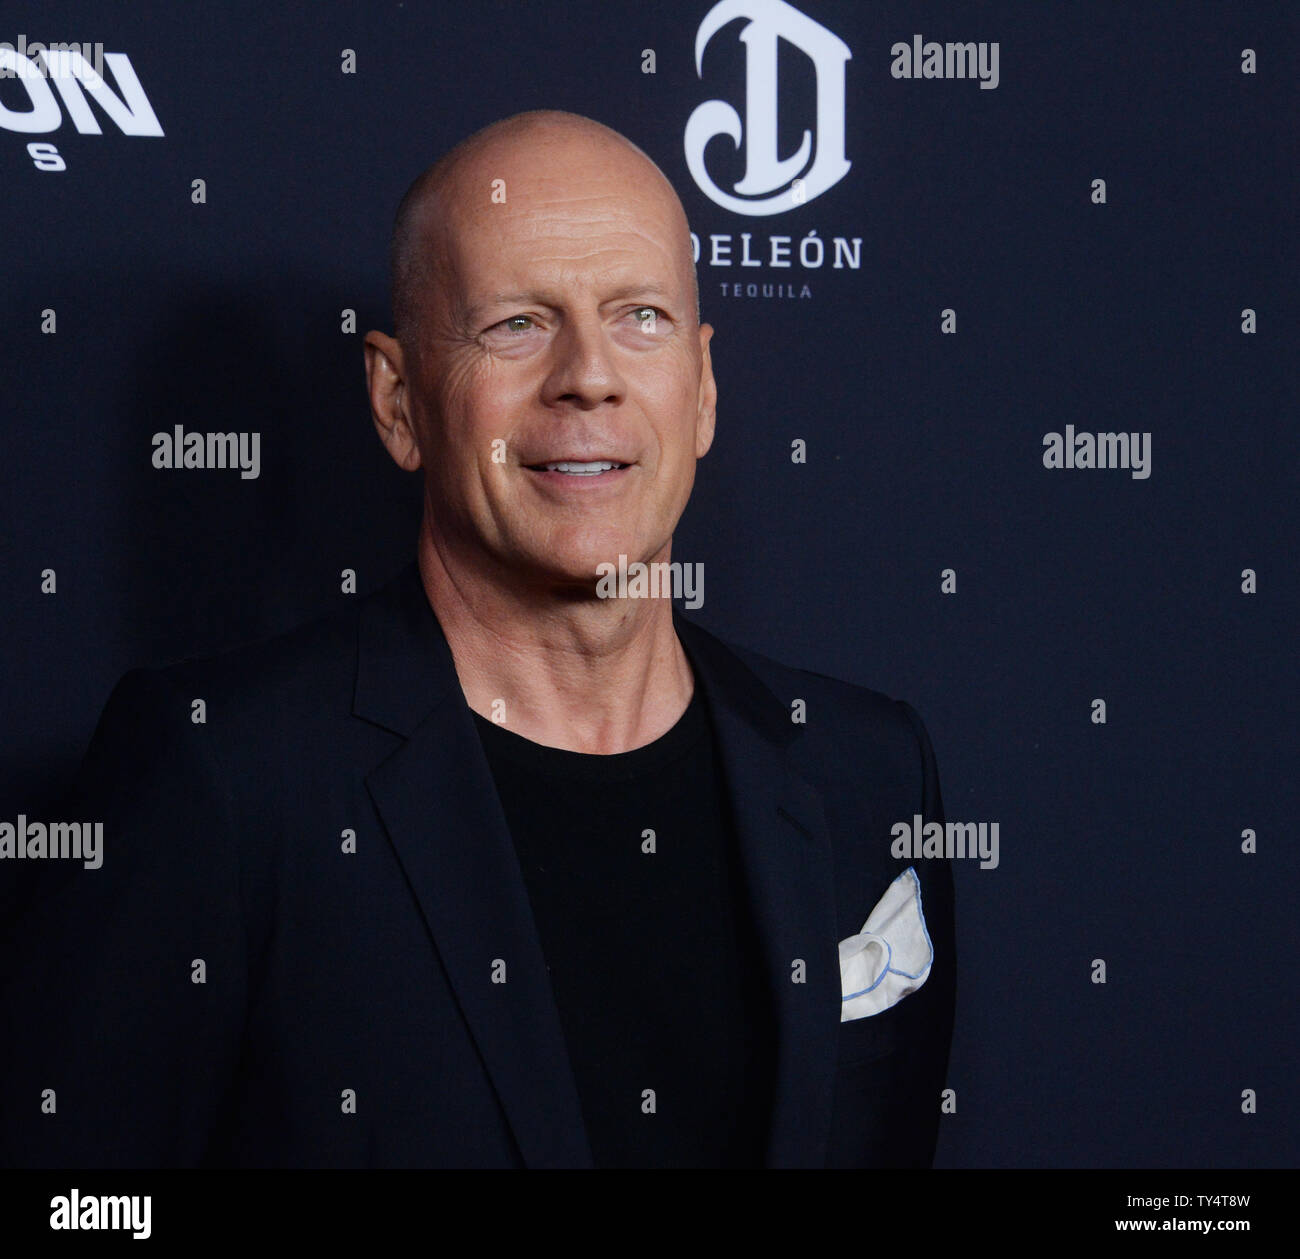 Cast member Bruce Willis attends the premiere of the motion picture crime thriller 'Sin City: A Dame to Kill For' attends the premiere of the film at TCL Chinese Theatre in the Hollywood section of Los Angeles on August 19, 2014. Storyline: Co-directors Robert Rodriguez and Frank Miller reunite to bring Miller's 'Sin City' graphic novels back to the screen. Weaving together two of Miller's classic stories with new tales, the town's most hard boiled citizens cross paths with some of its more notorious inhabitants.   UPI/Jim Ruymen Stock Photo